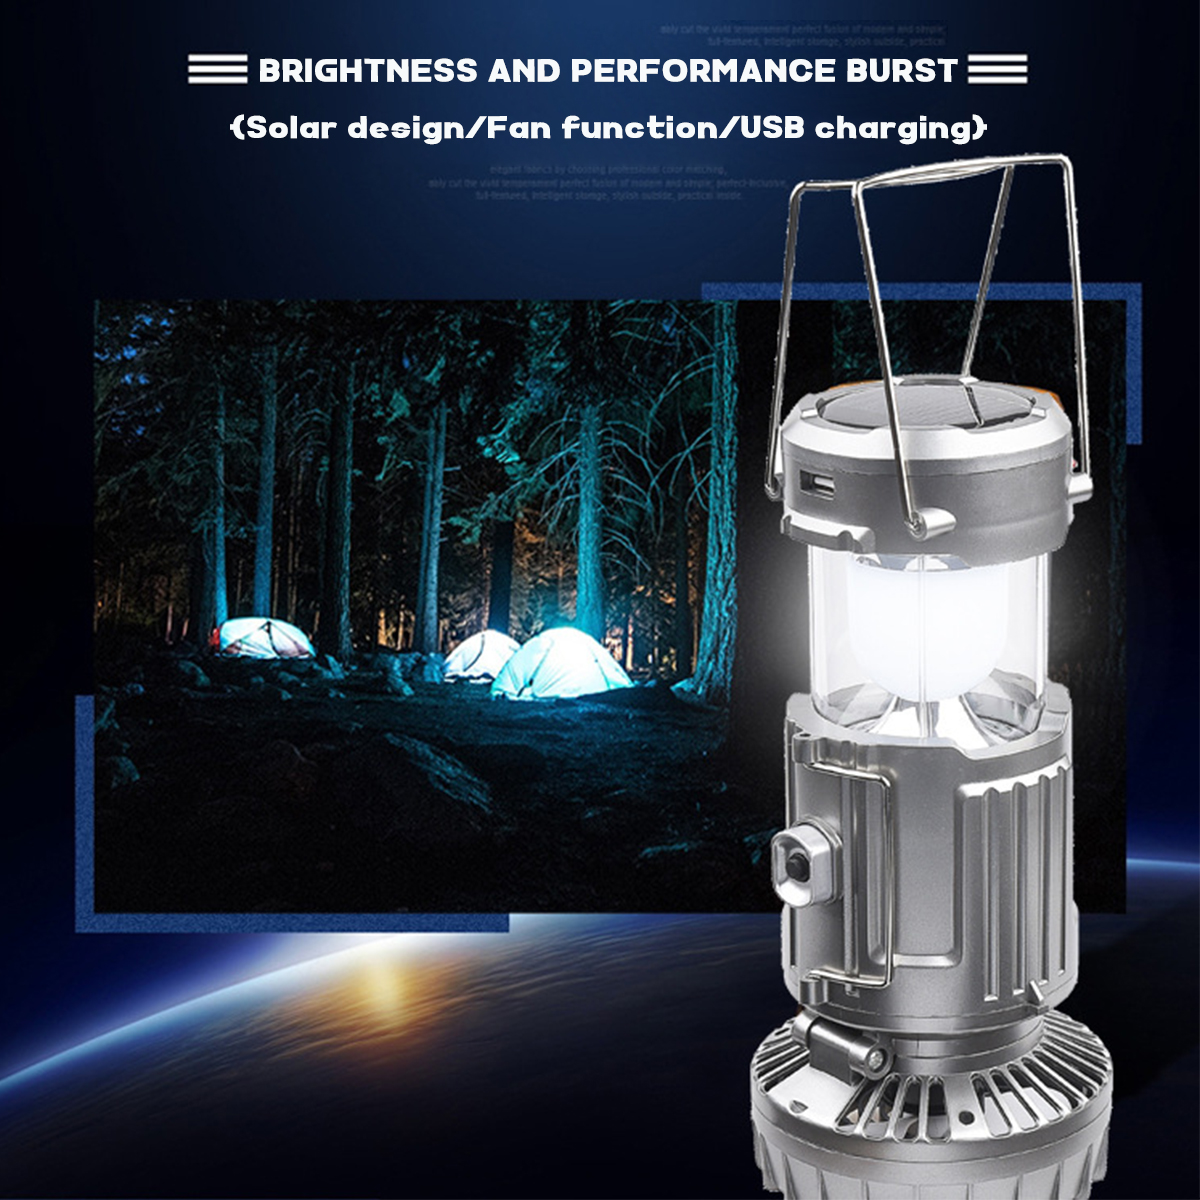 Solar-Outdoor-Fan-Rechargeable-Camping-Lantern-Light-LED-Hand-Lamp-Flashlight-1763838-5